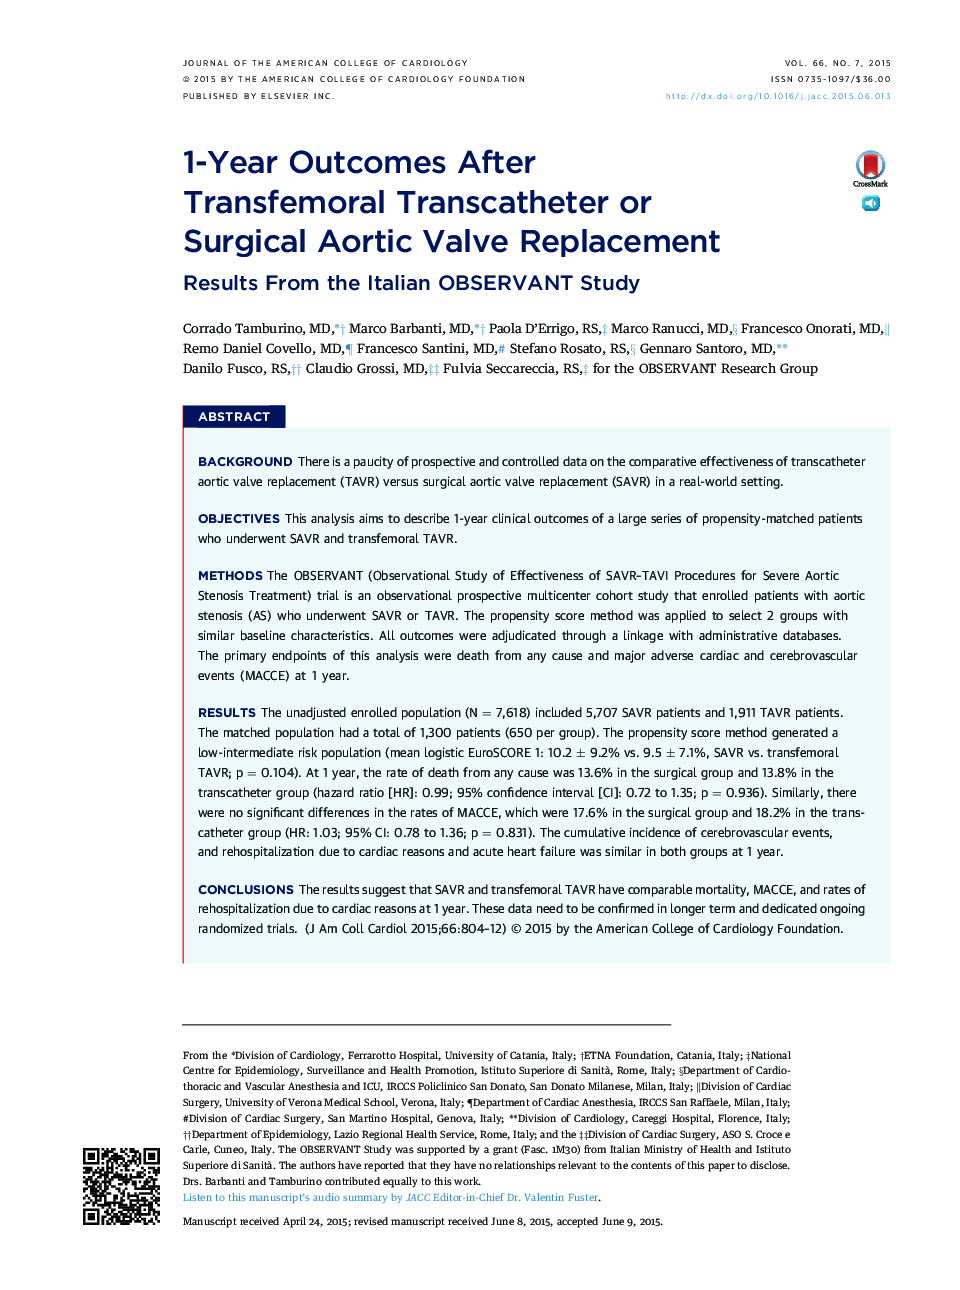 1-Year Outcomes After TransfemoralÂ Transcatheter or SurgicalÂ Aortic Valve Replacement: Results From the Italian OBSERVANT Study